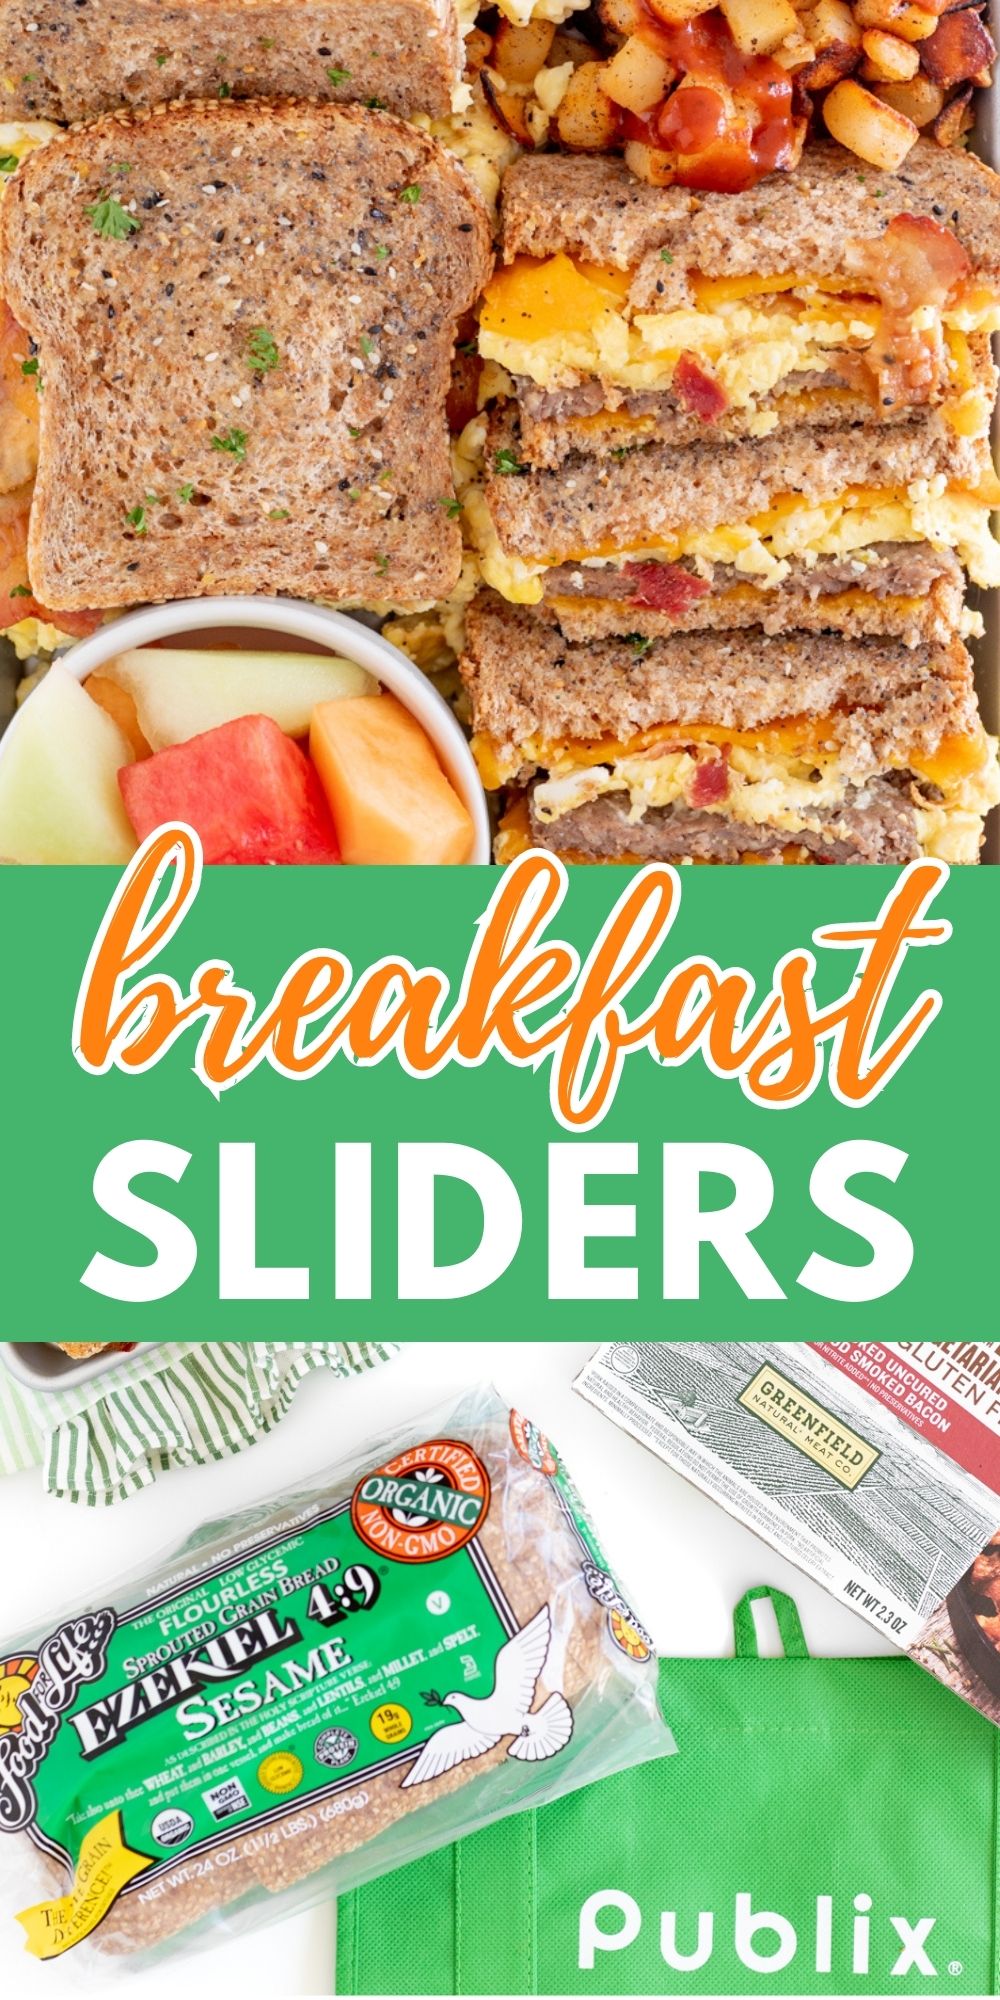 Sausage Bacon Breakfast Sliders on Bread Promotional Pin Image